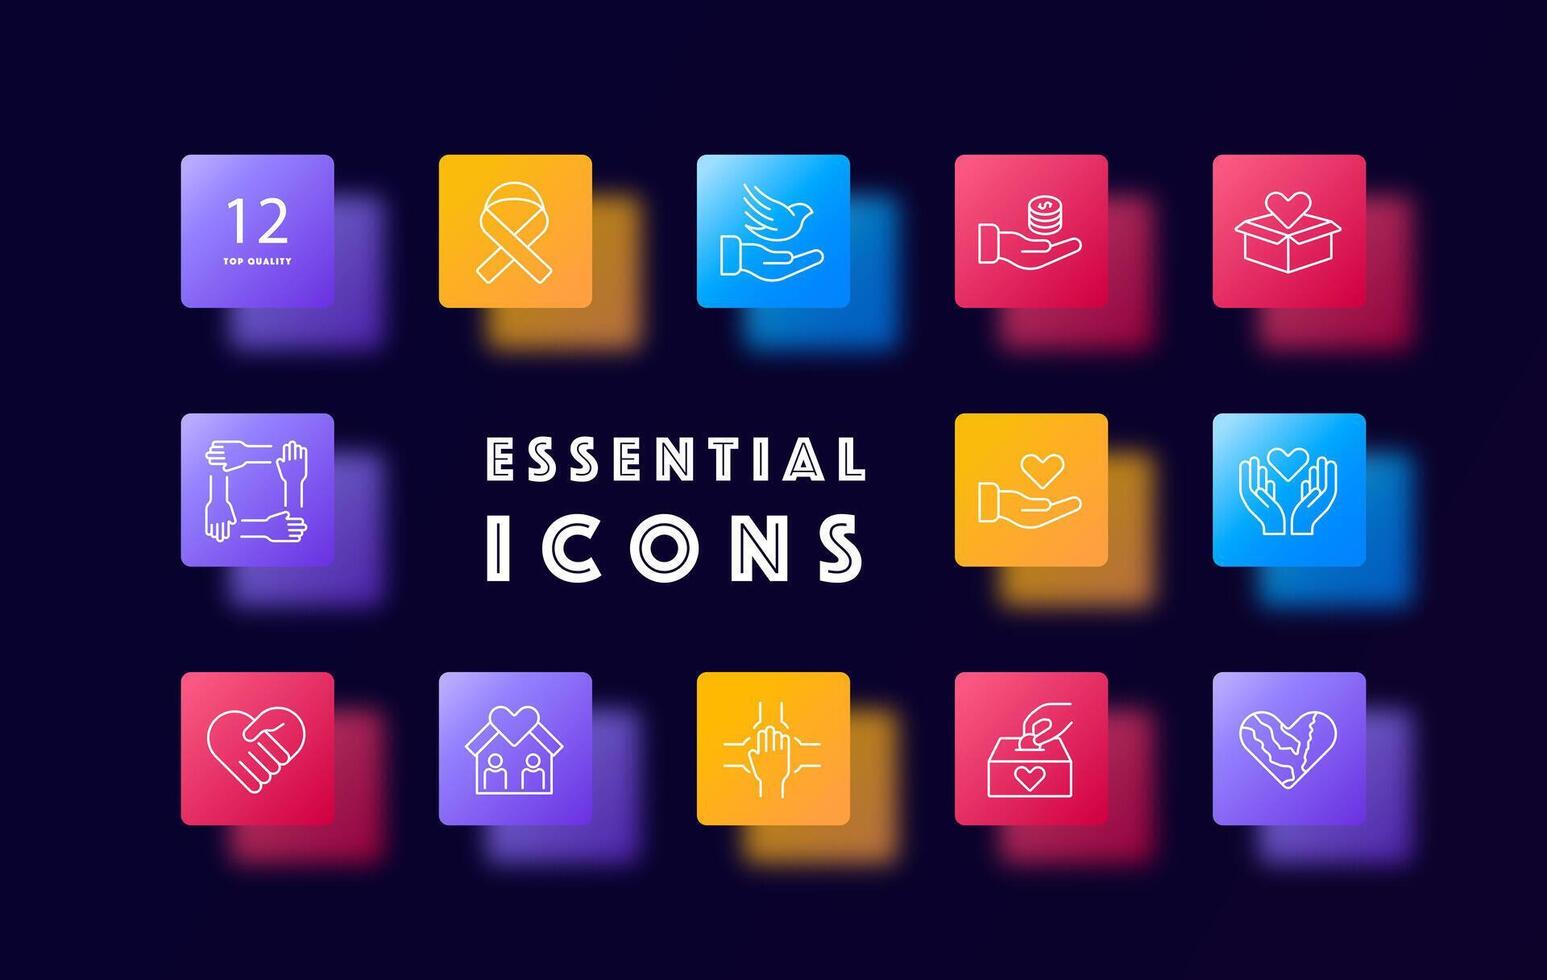 Donations icon set. Ribbon, fight cancer, hands, heart, offer, box, support, gradient, house, teamwork, bird, money, support. The concept of good nature and helping others. Glassmorphism style. vector